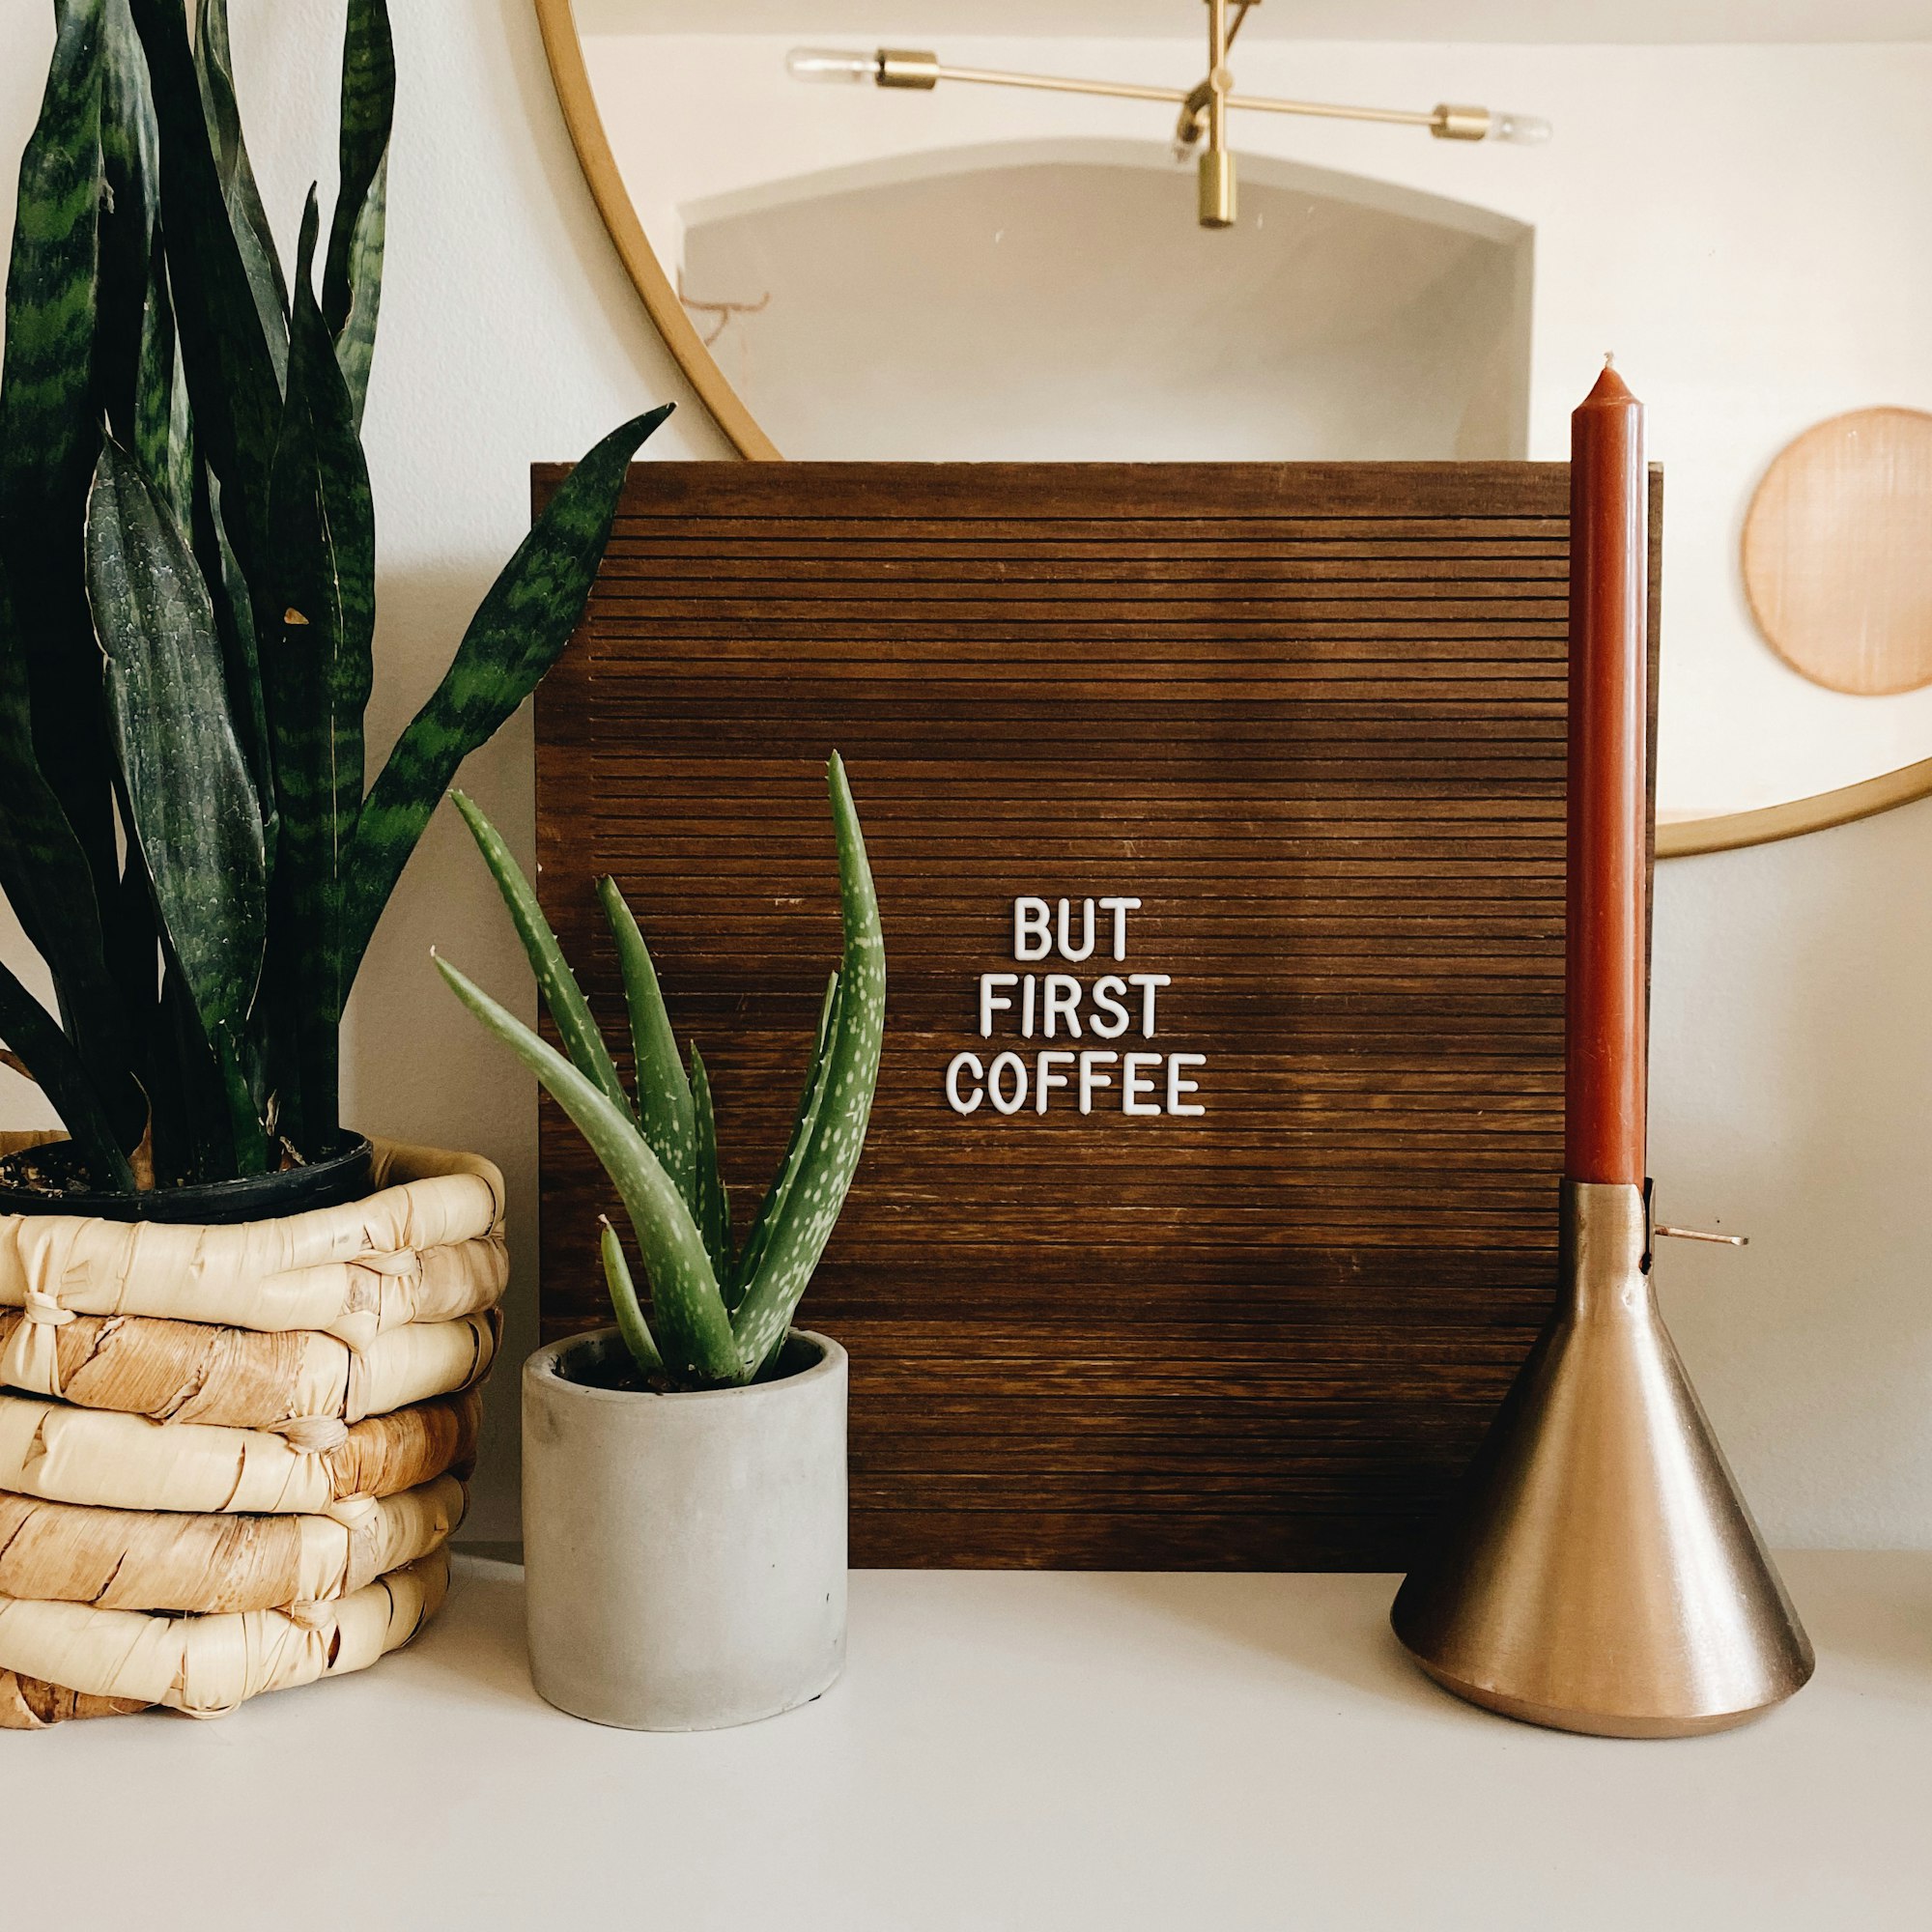 but first coffee letter board sign with candle stick and plants with round mirror and hanging west elm light in the background